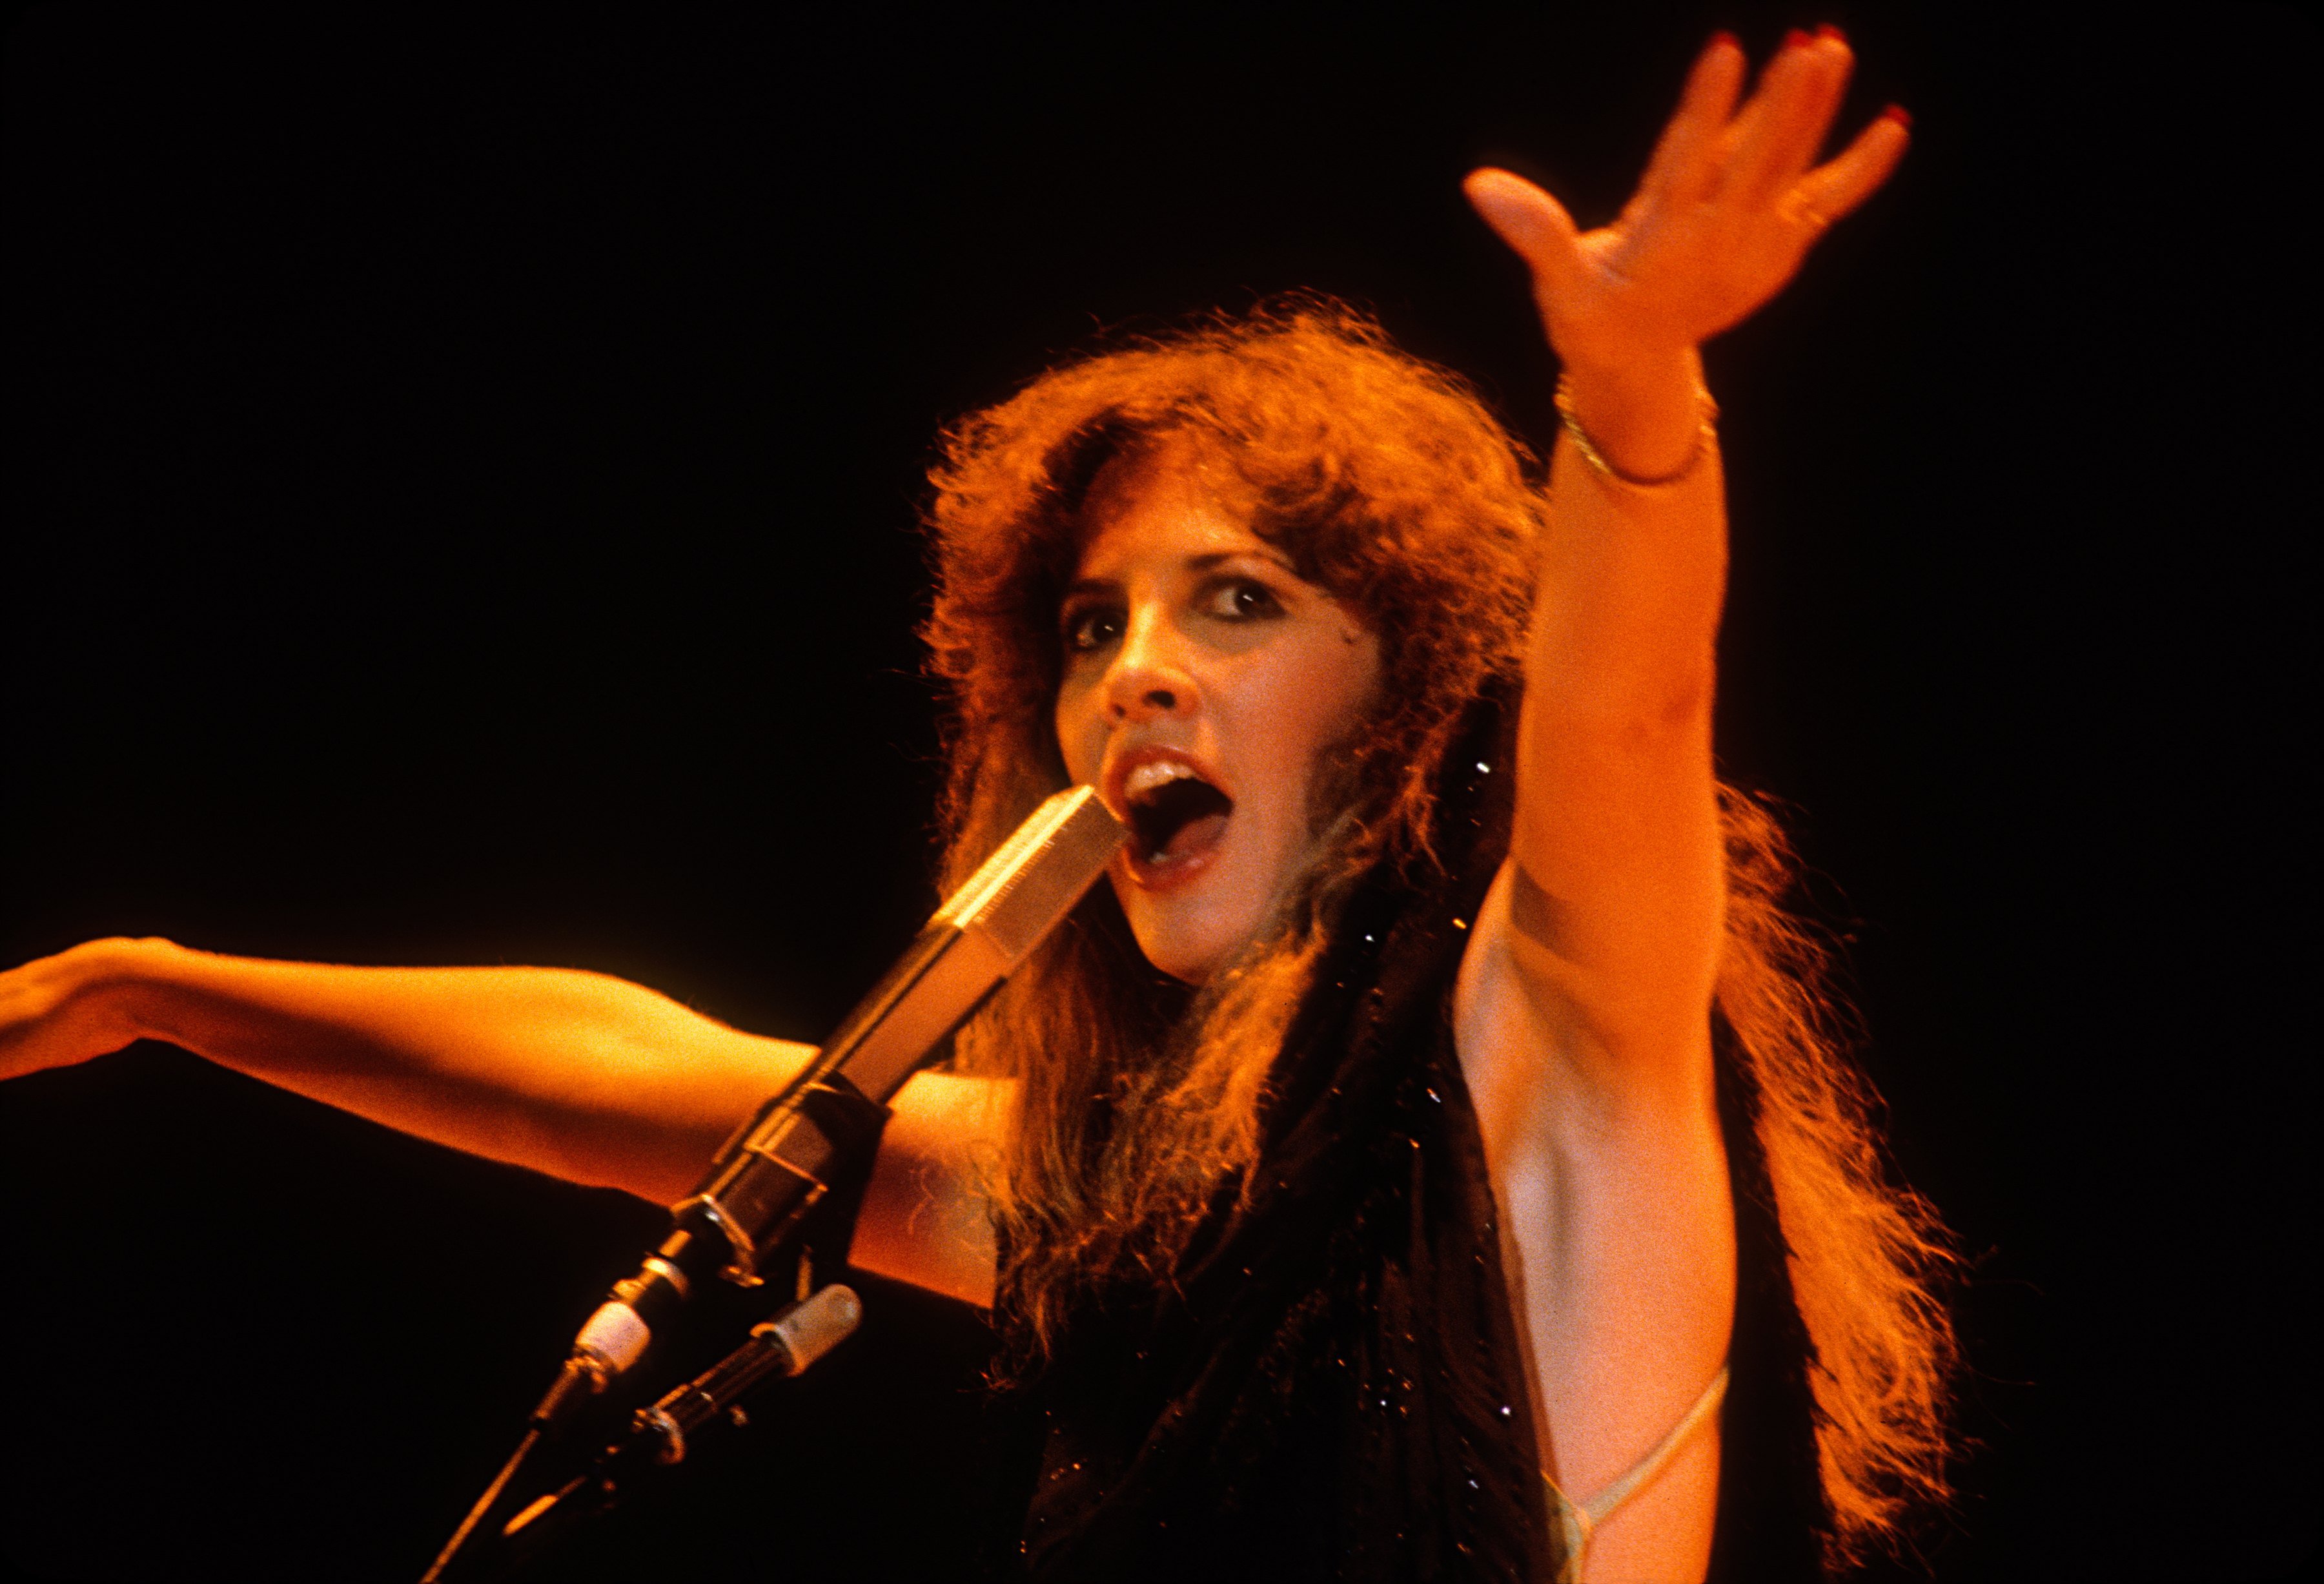 Stevie Nicks wears a black tank top and stands in front of a microphone. She wishes she could have performed with Prince.